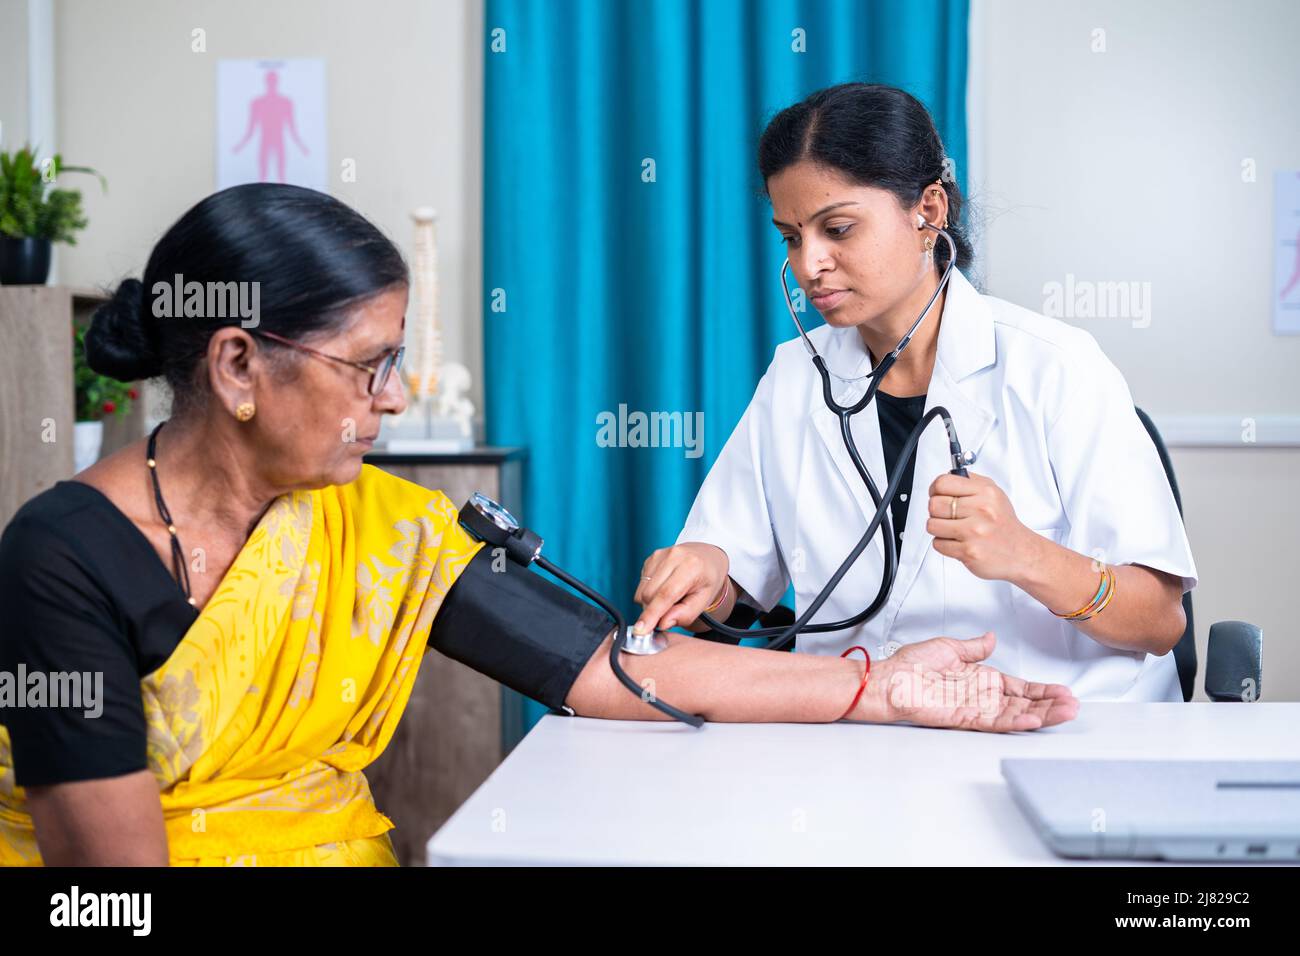 Doctor checking blood pressure or bp of senior woman patient at hospital - concept of health care, medical treatment and consultation. Stock Photo